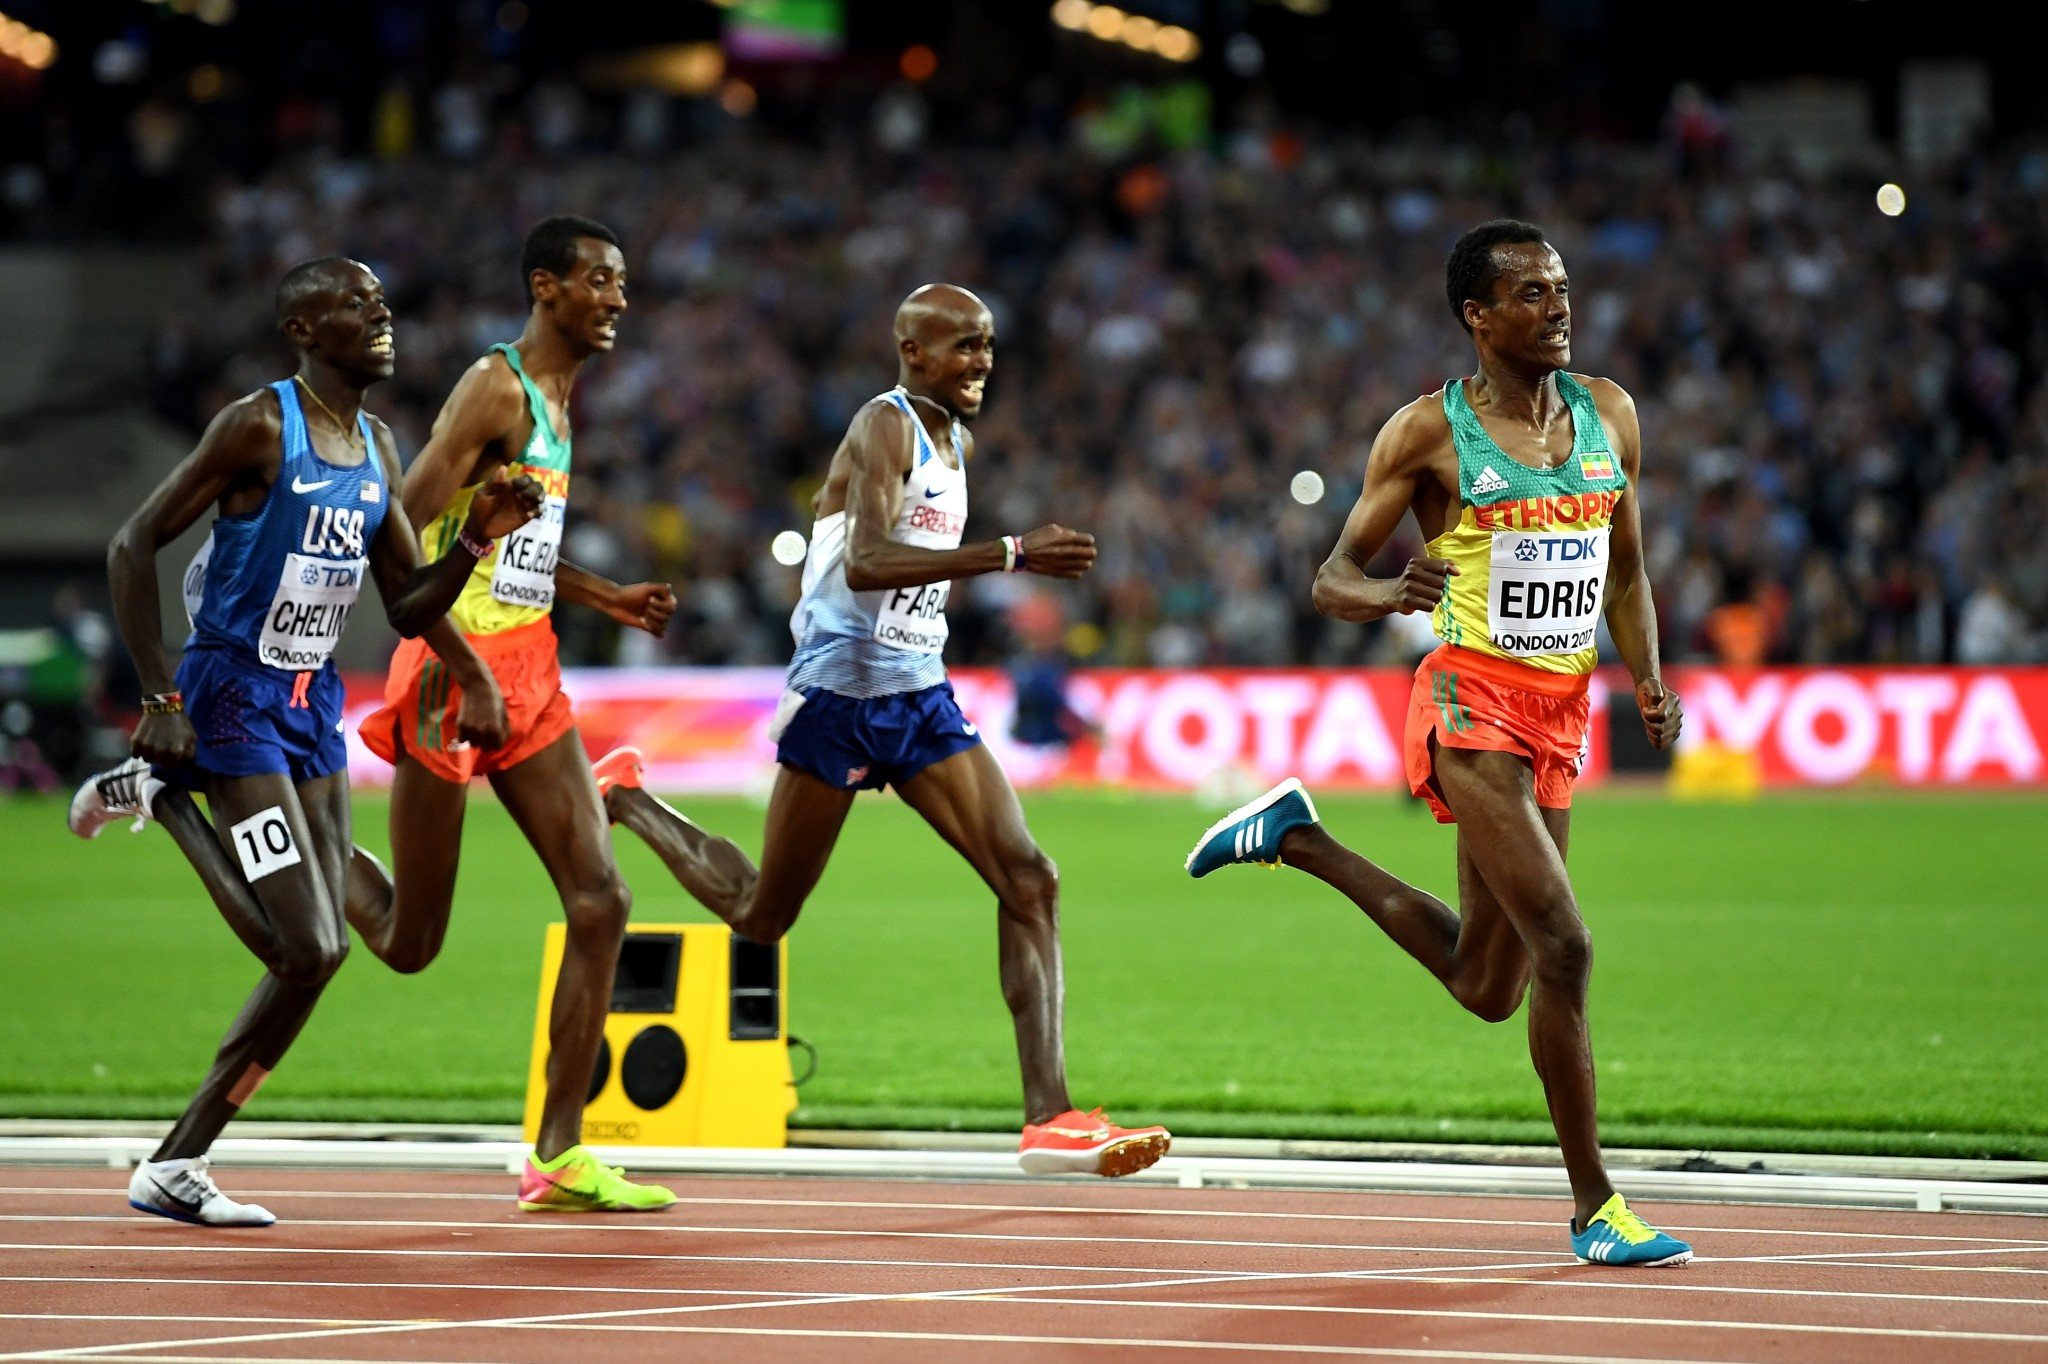 Ethiopia's Muktar Edris sprinted clear on the last lap of the 5,000m to beat Britain's Sir Mo Farah ©Getty Images